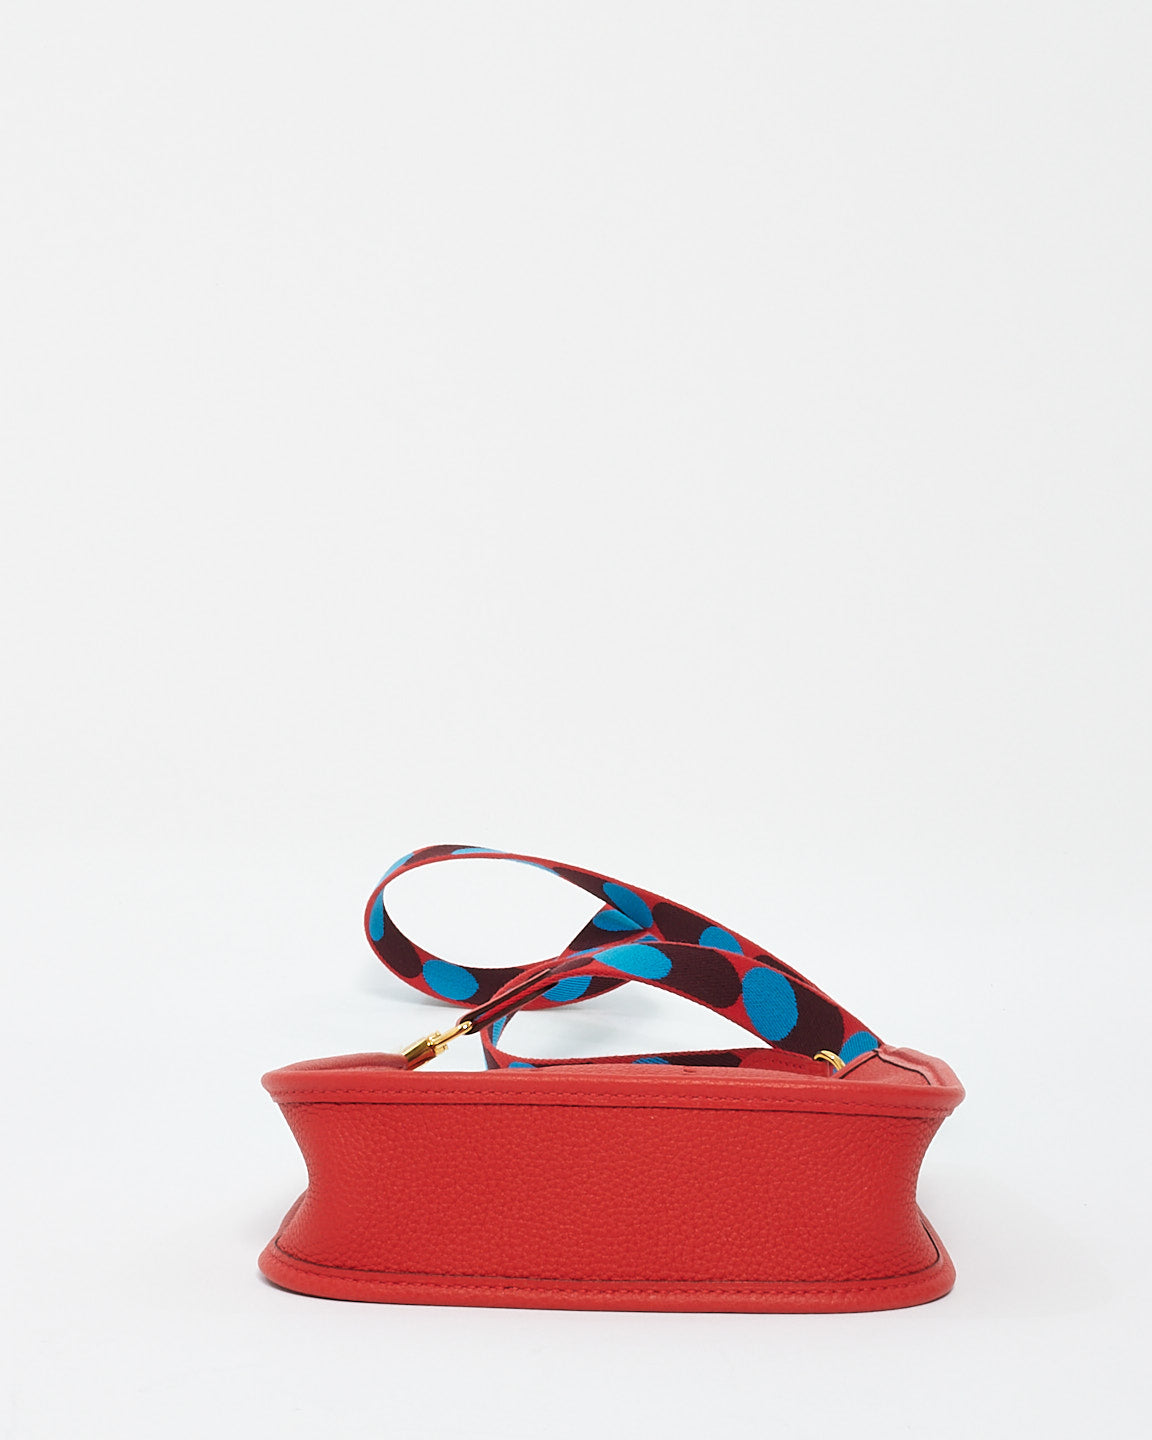 Hermès Coeur Red Taurillon Maurice Leather Evelyne TPM